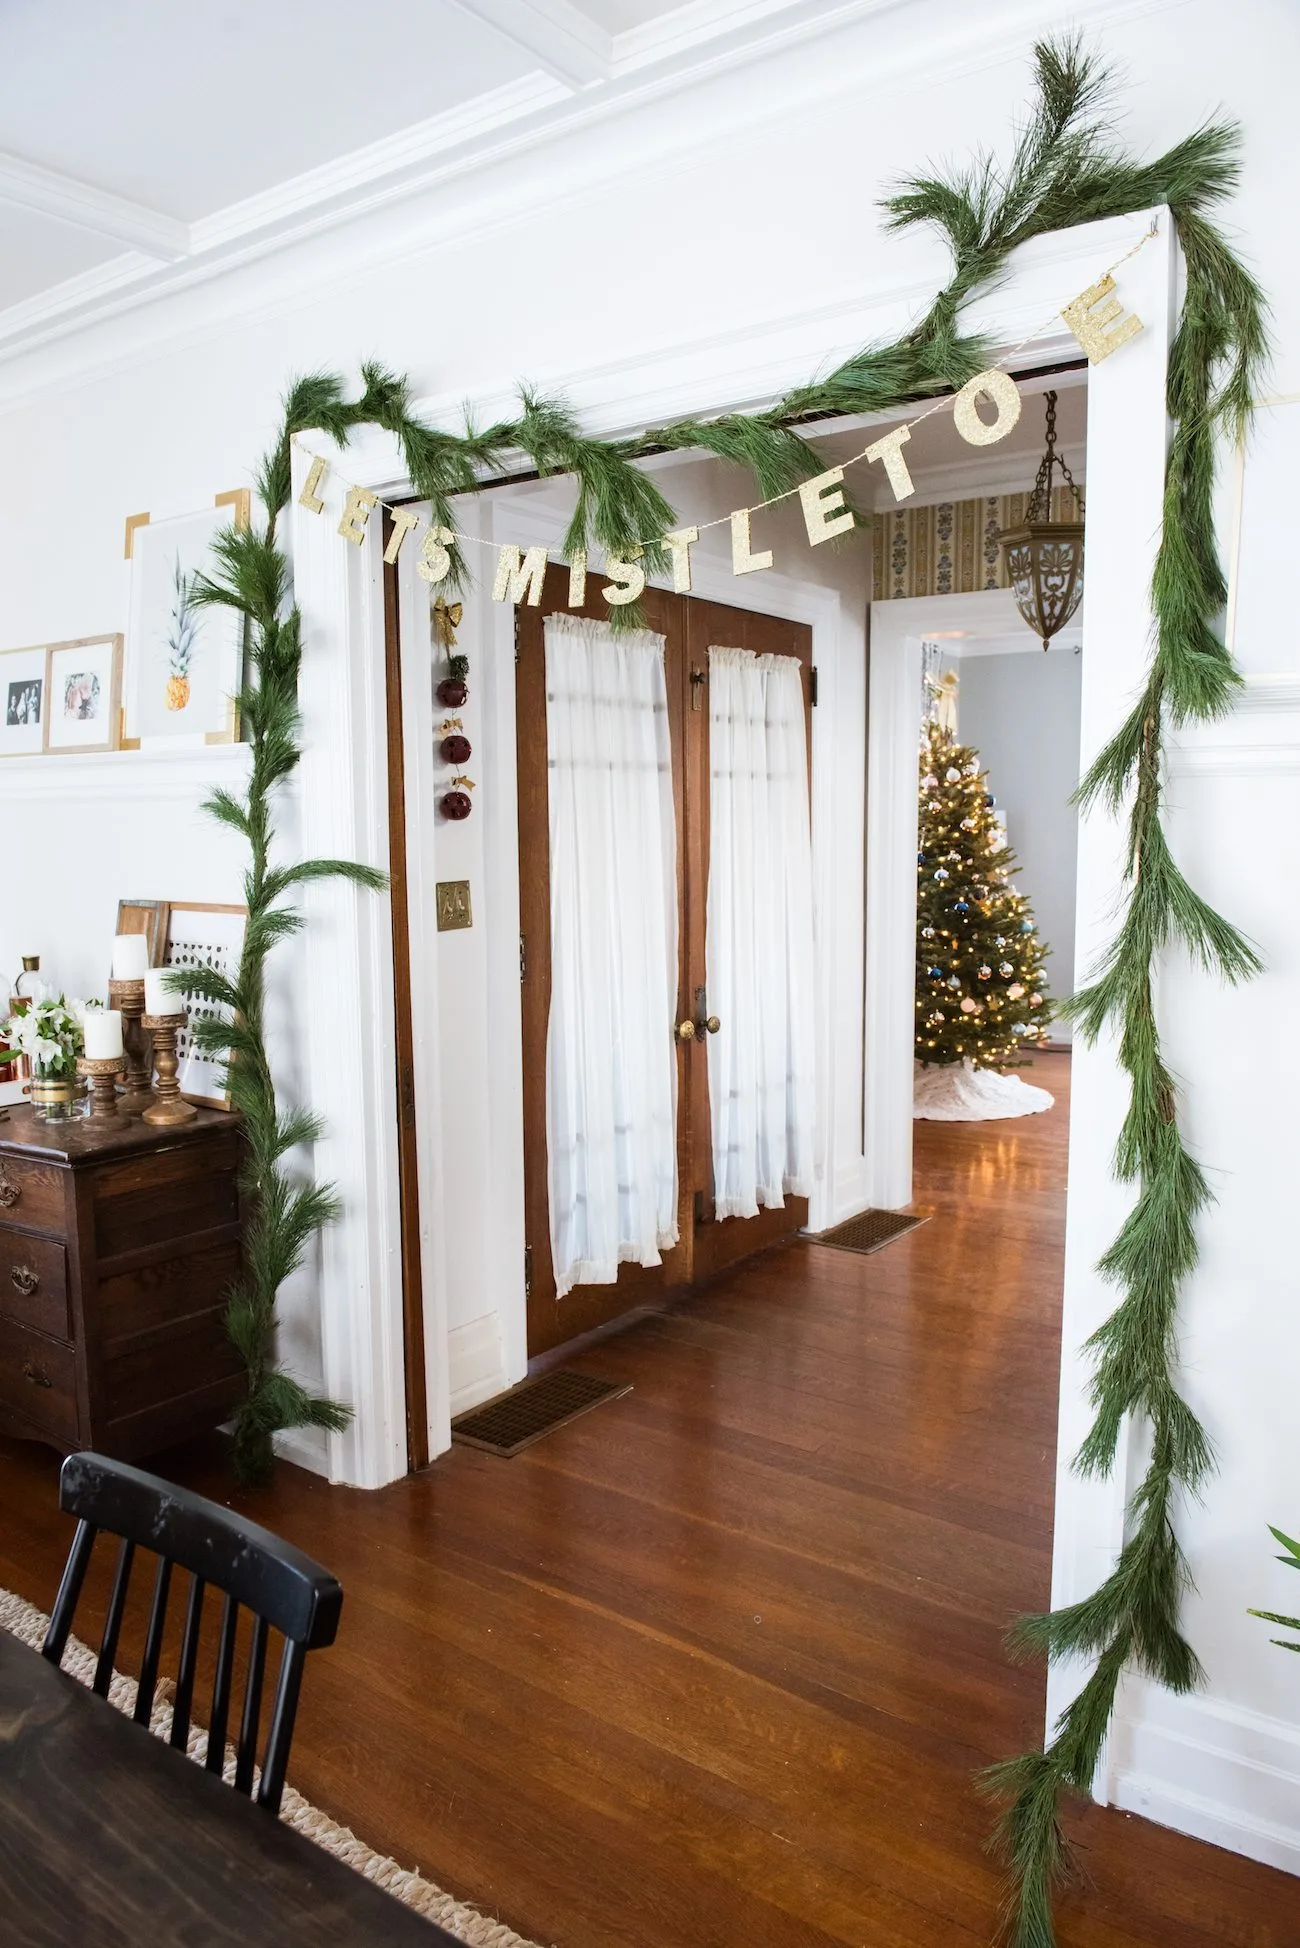 Dining Room Christmas Decor | Decorating for the holidays from @cydconverse